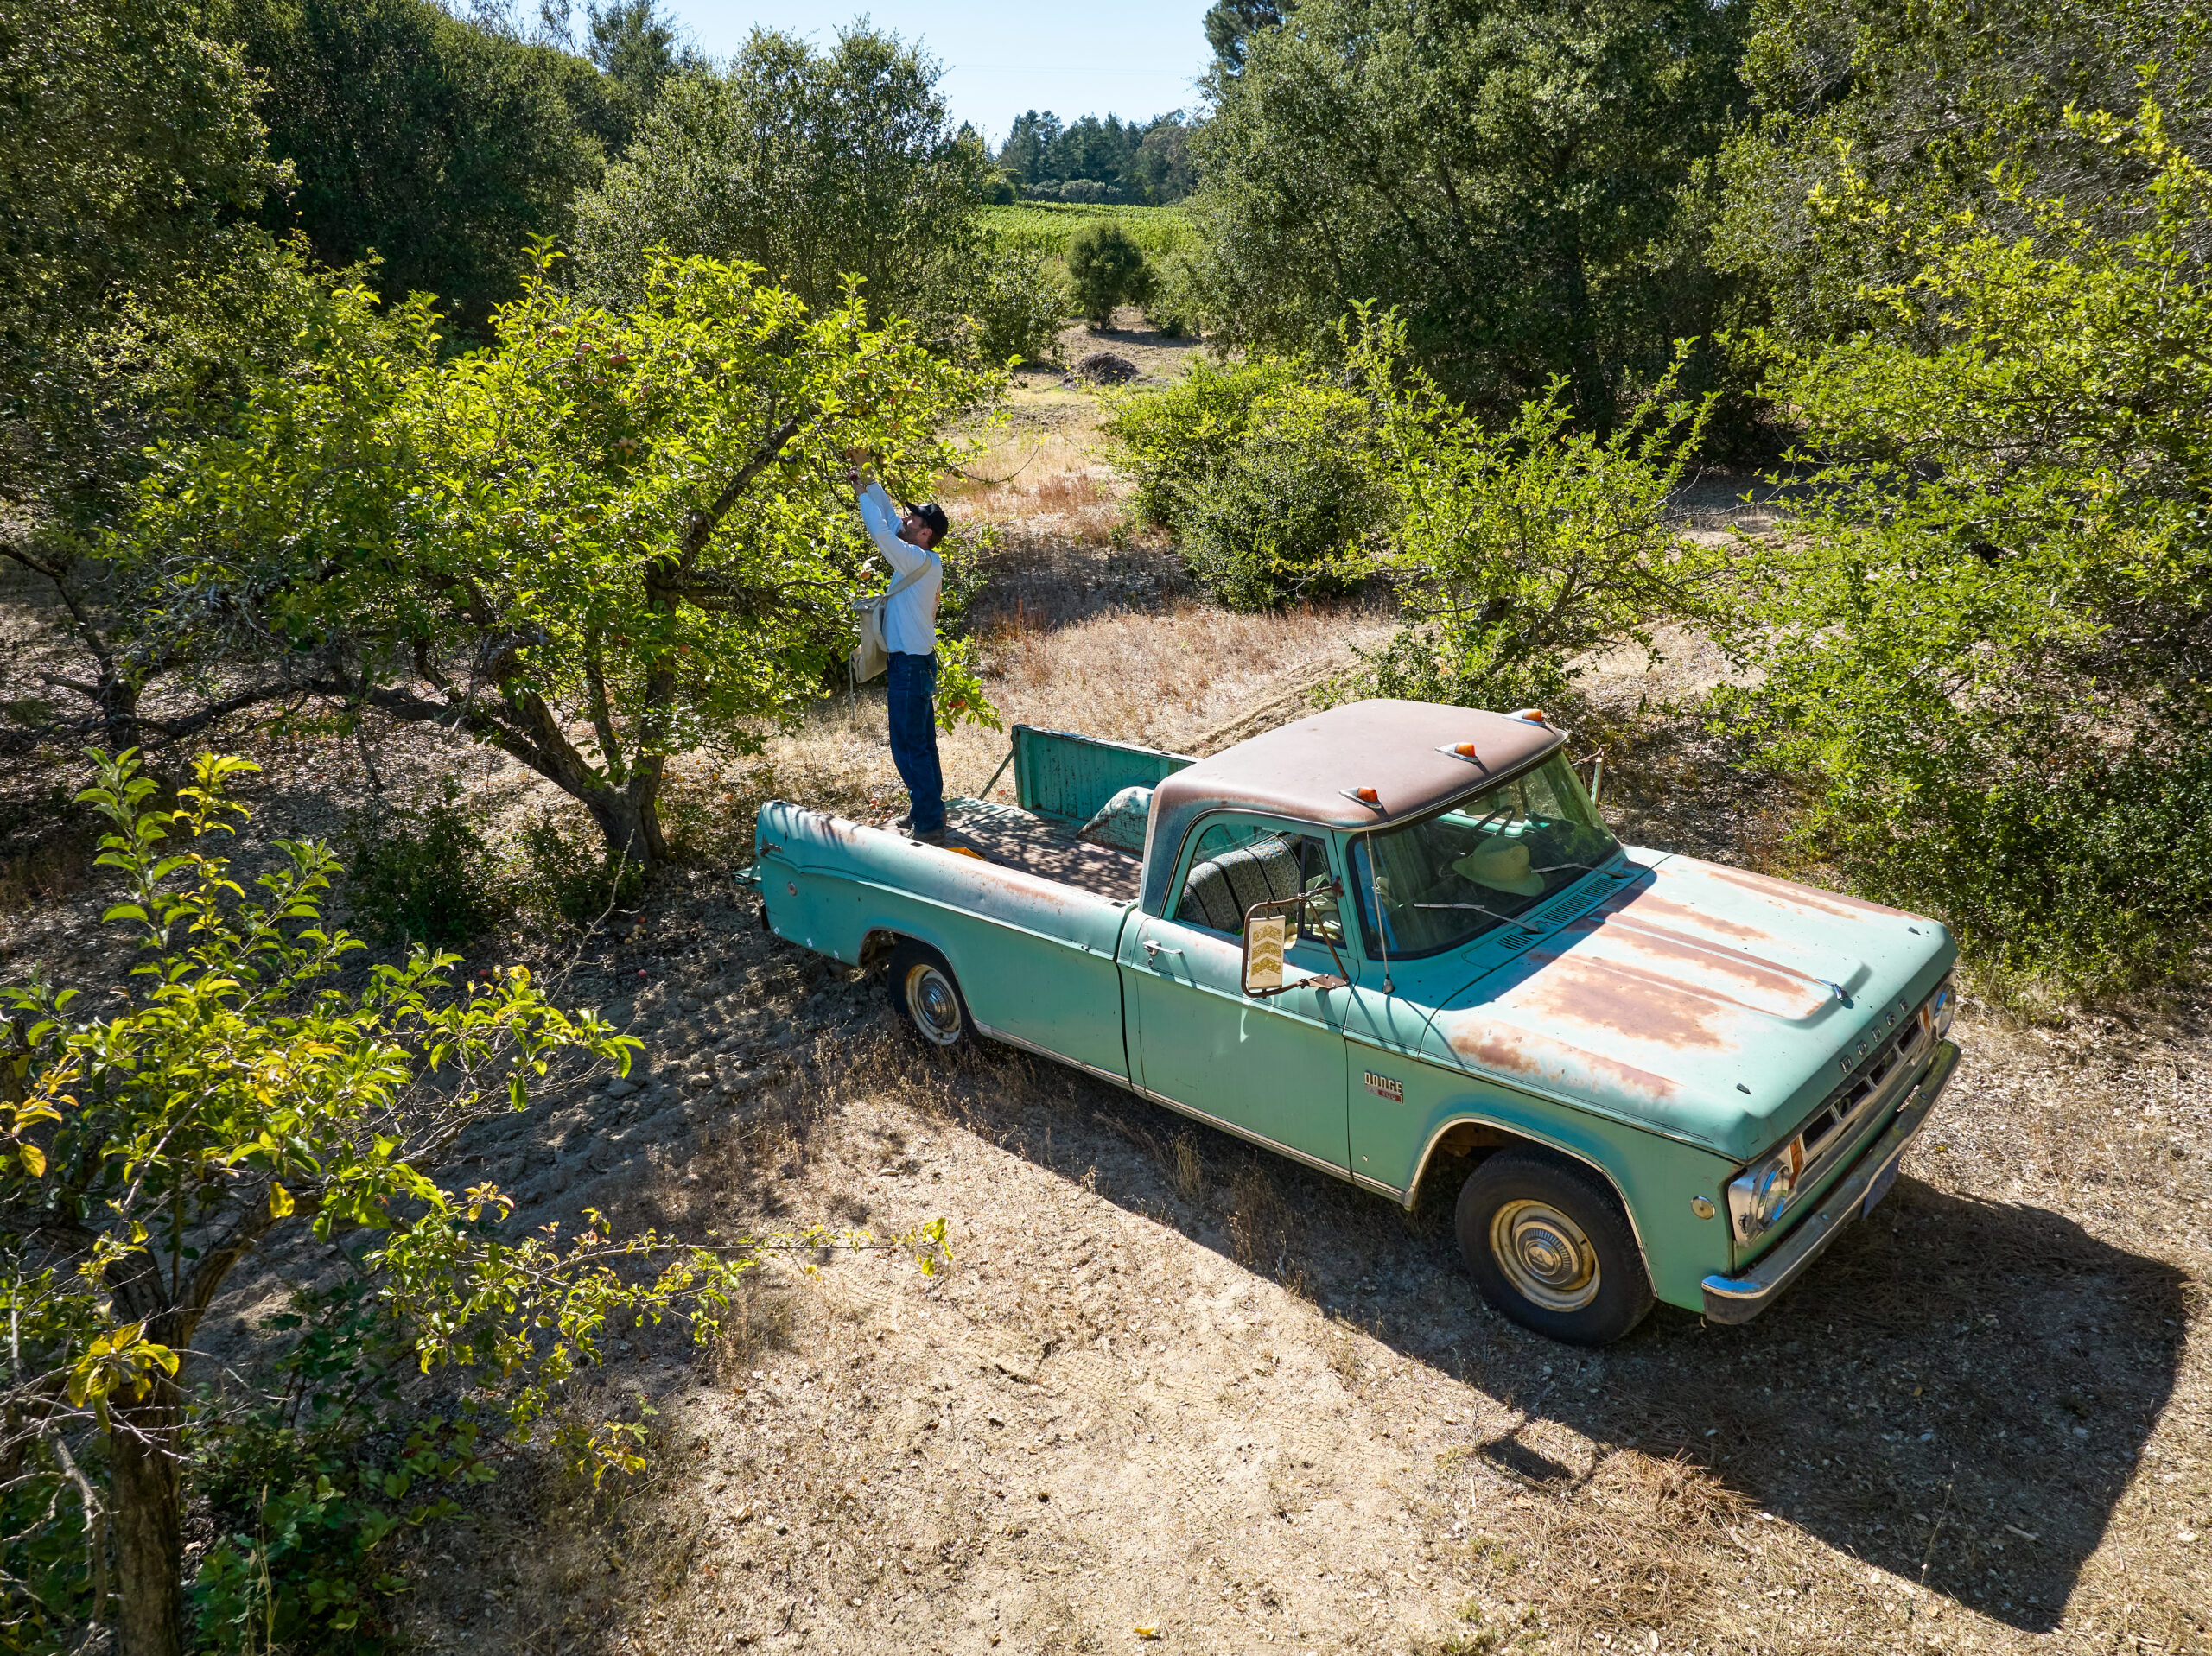 Aaron Brown picks apples from the back of an old pickup truck. (Photo by Kim Carroll)